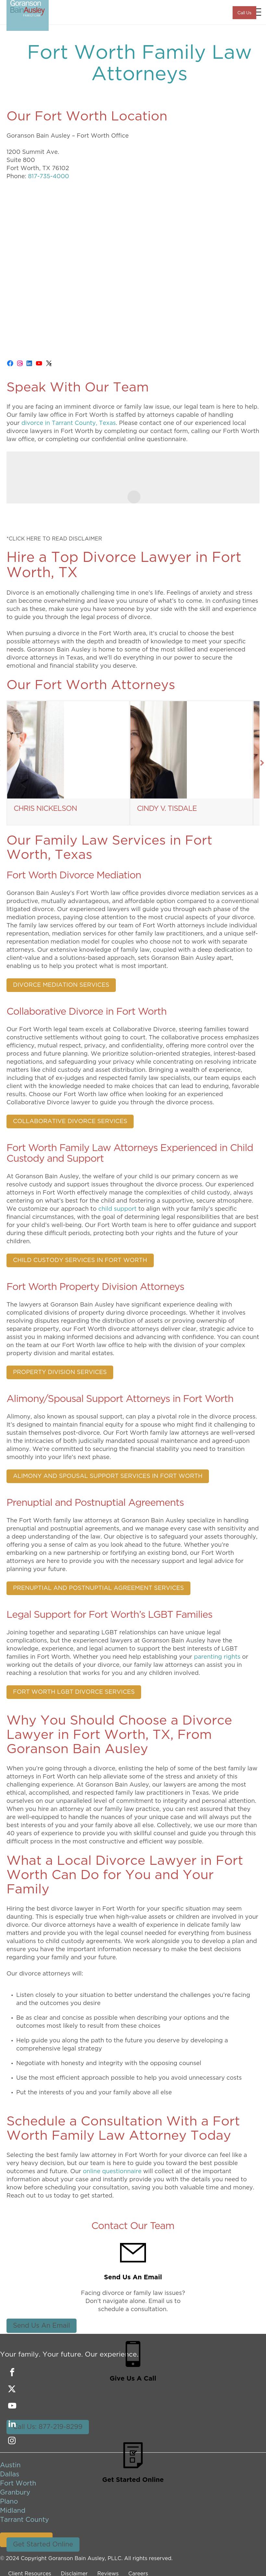 Law Office of Gary L. Nickelson - Fort Worth TX Lawyers